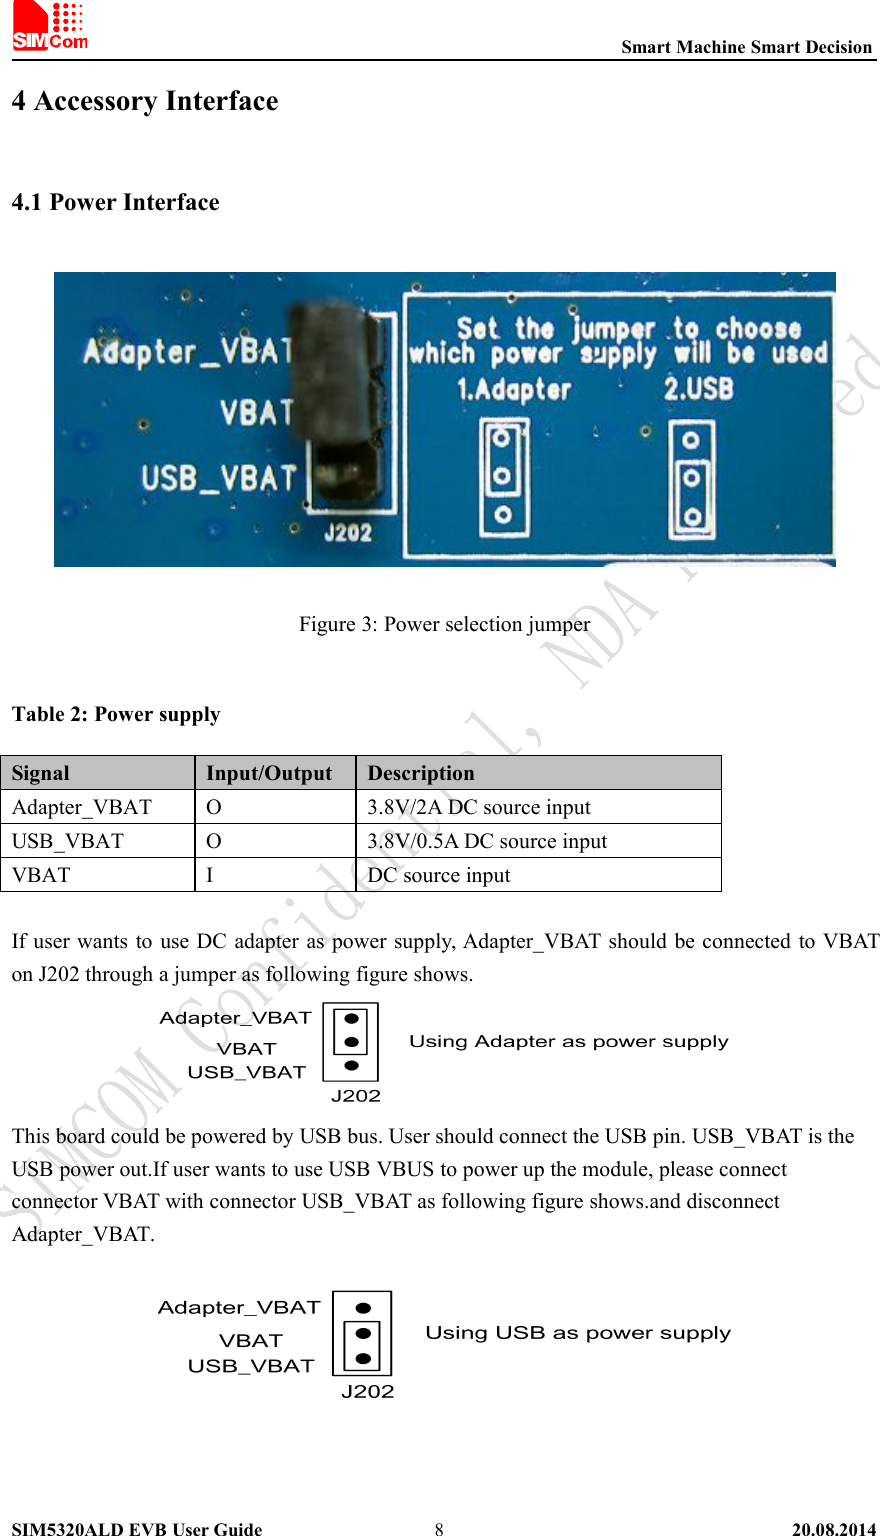 Smart Machine Smart DecisionSIM5320ALD EVB User Guide 20.08.201484 Accessory Interface4.1 Power InterfaceFigure 3: Power selection jumperTable 2: Power supplySignal Input/Output DescriptionAdapter_VBAT O 3.8V/2A DC source inputUSB_VBAT O 3.8V/0.5A DC source inputVBAT I DC source inputIf user wants to use DC adapter as power supply, Adapter_VBAT should be connected to VBATon J202 through a jumper as following figure shows.This board could be powered by USB bus. User should connect the USB pin. USB_VBAT is theUSB power out.If user wants to use USB VBUS to power up the module, please connectconnector VBAT with connector USB_VBAT as following figure shows.and disconnectAdapter_VBAT.